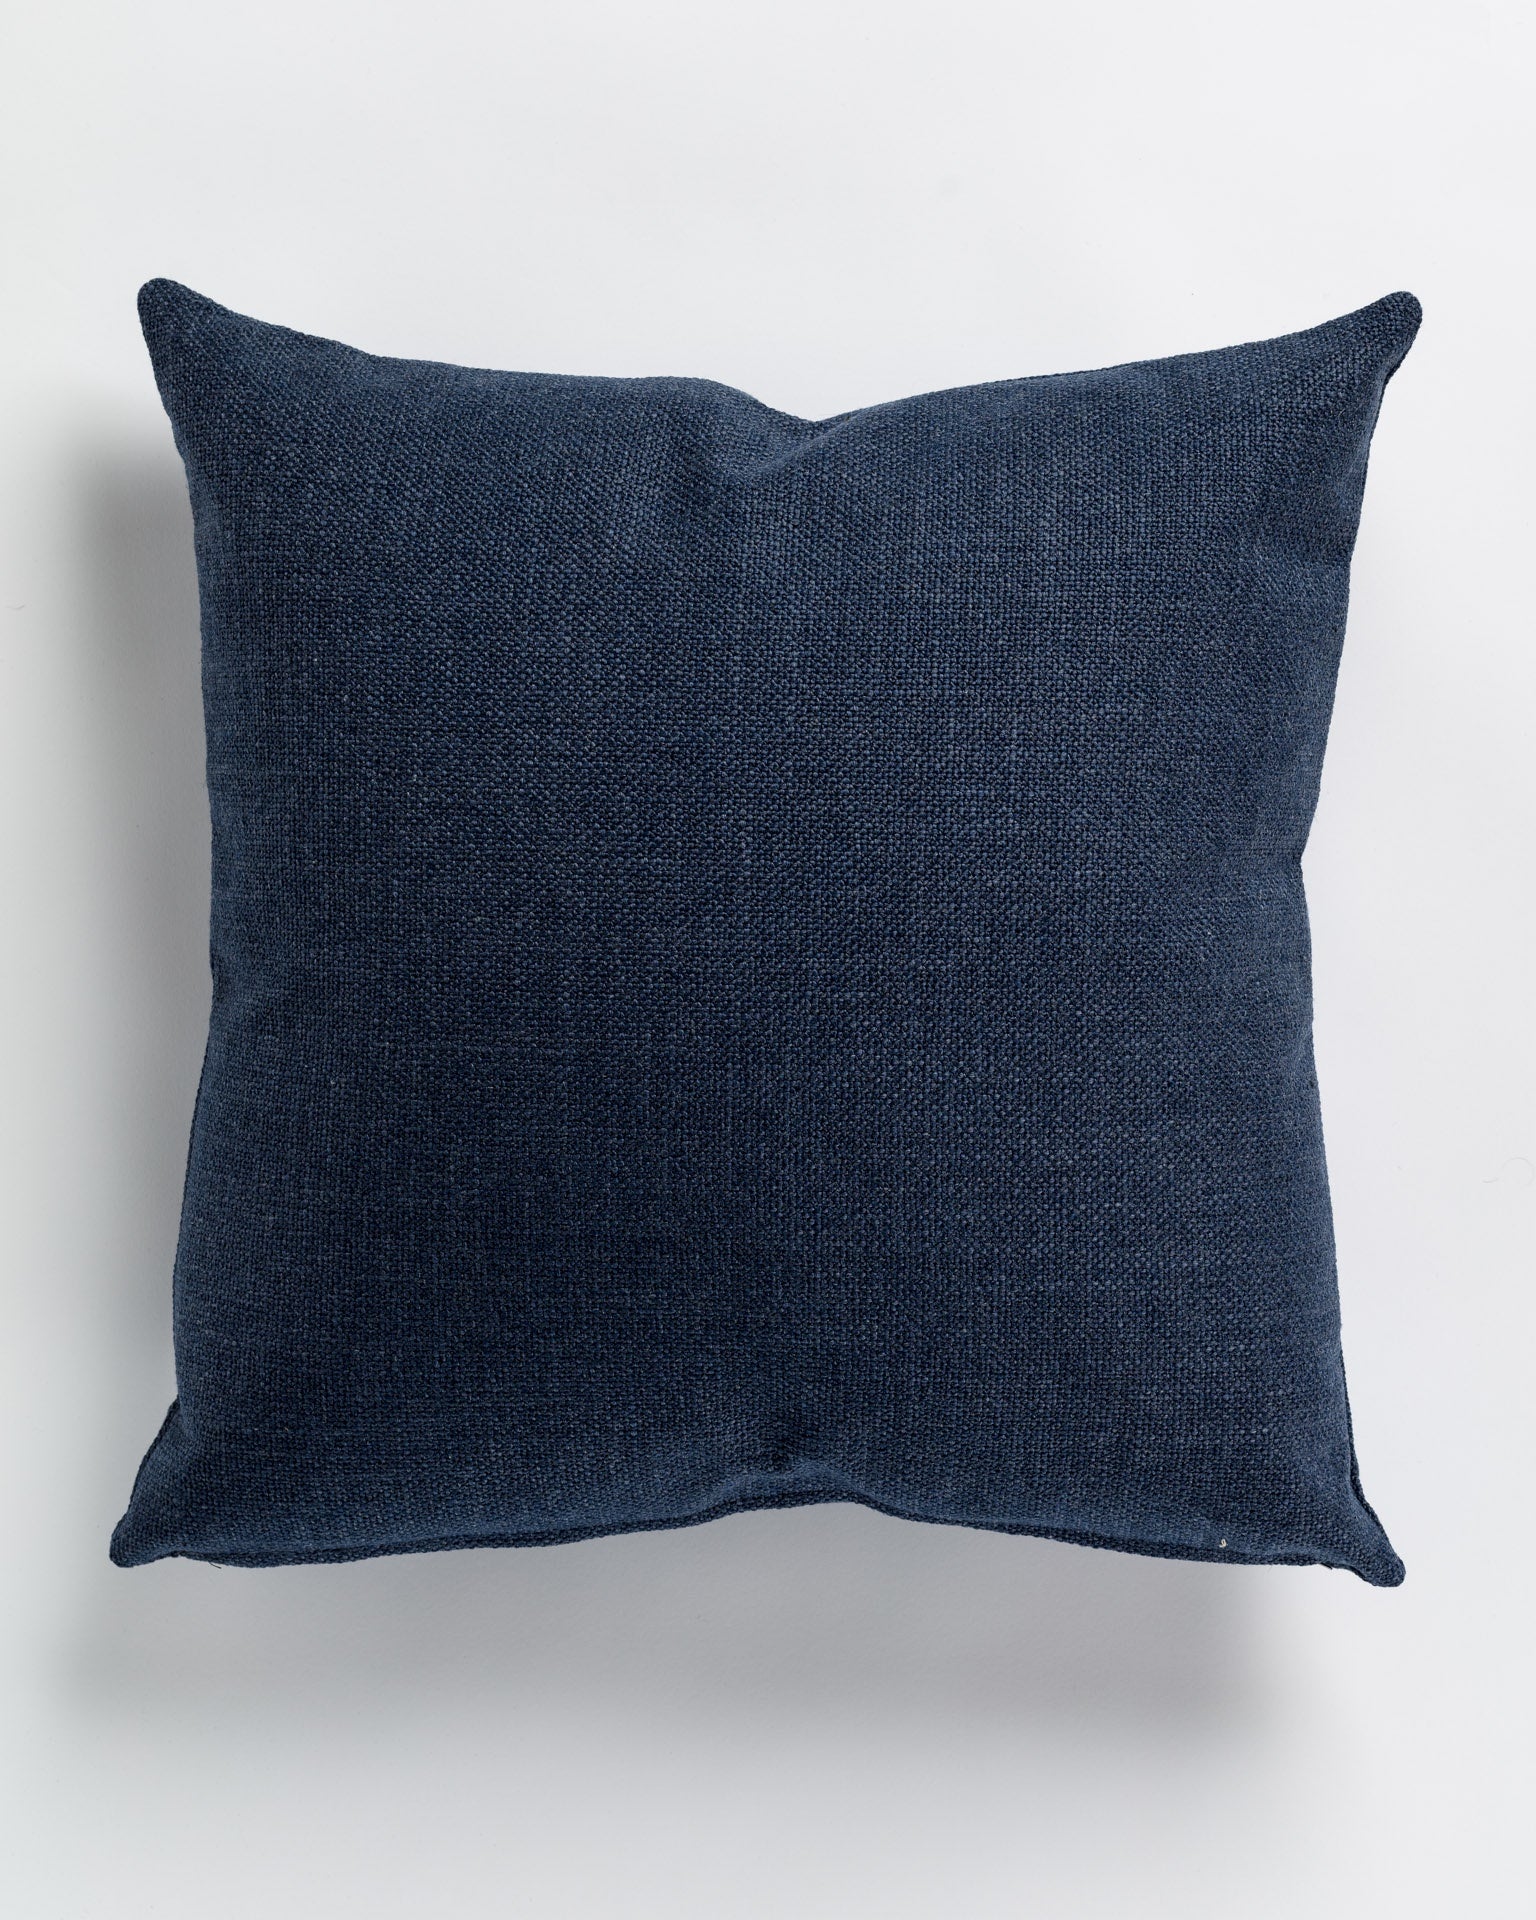 A square Bermuda Blue Pillow 26x26 with a textured fabric, displayed against a plain white background in an Arizona style by Gabby.